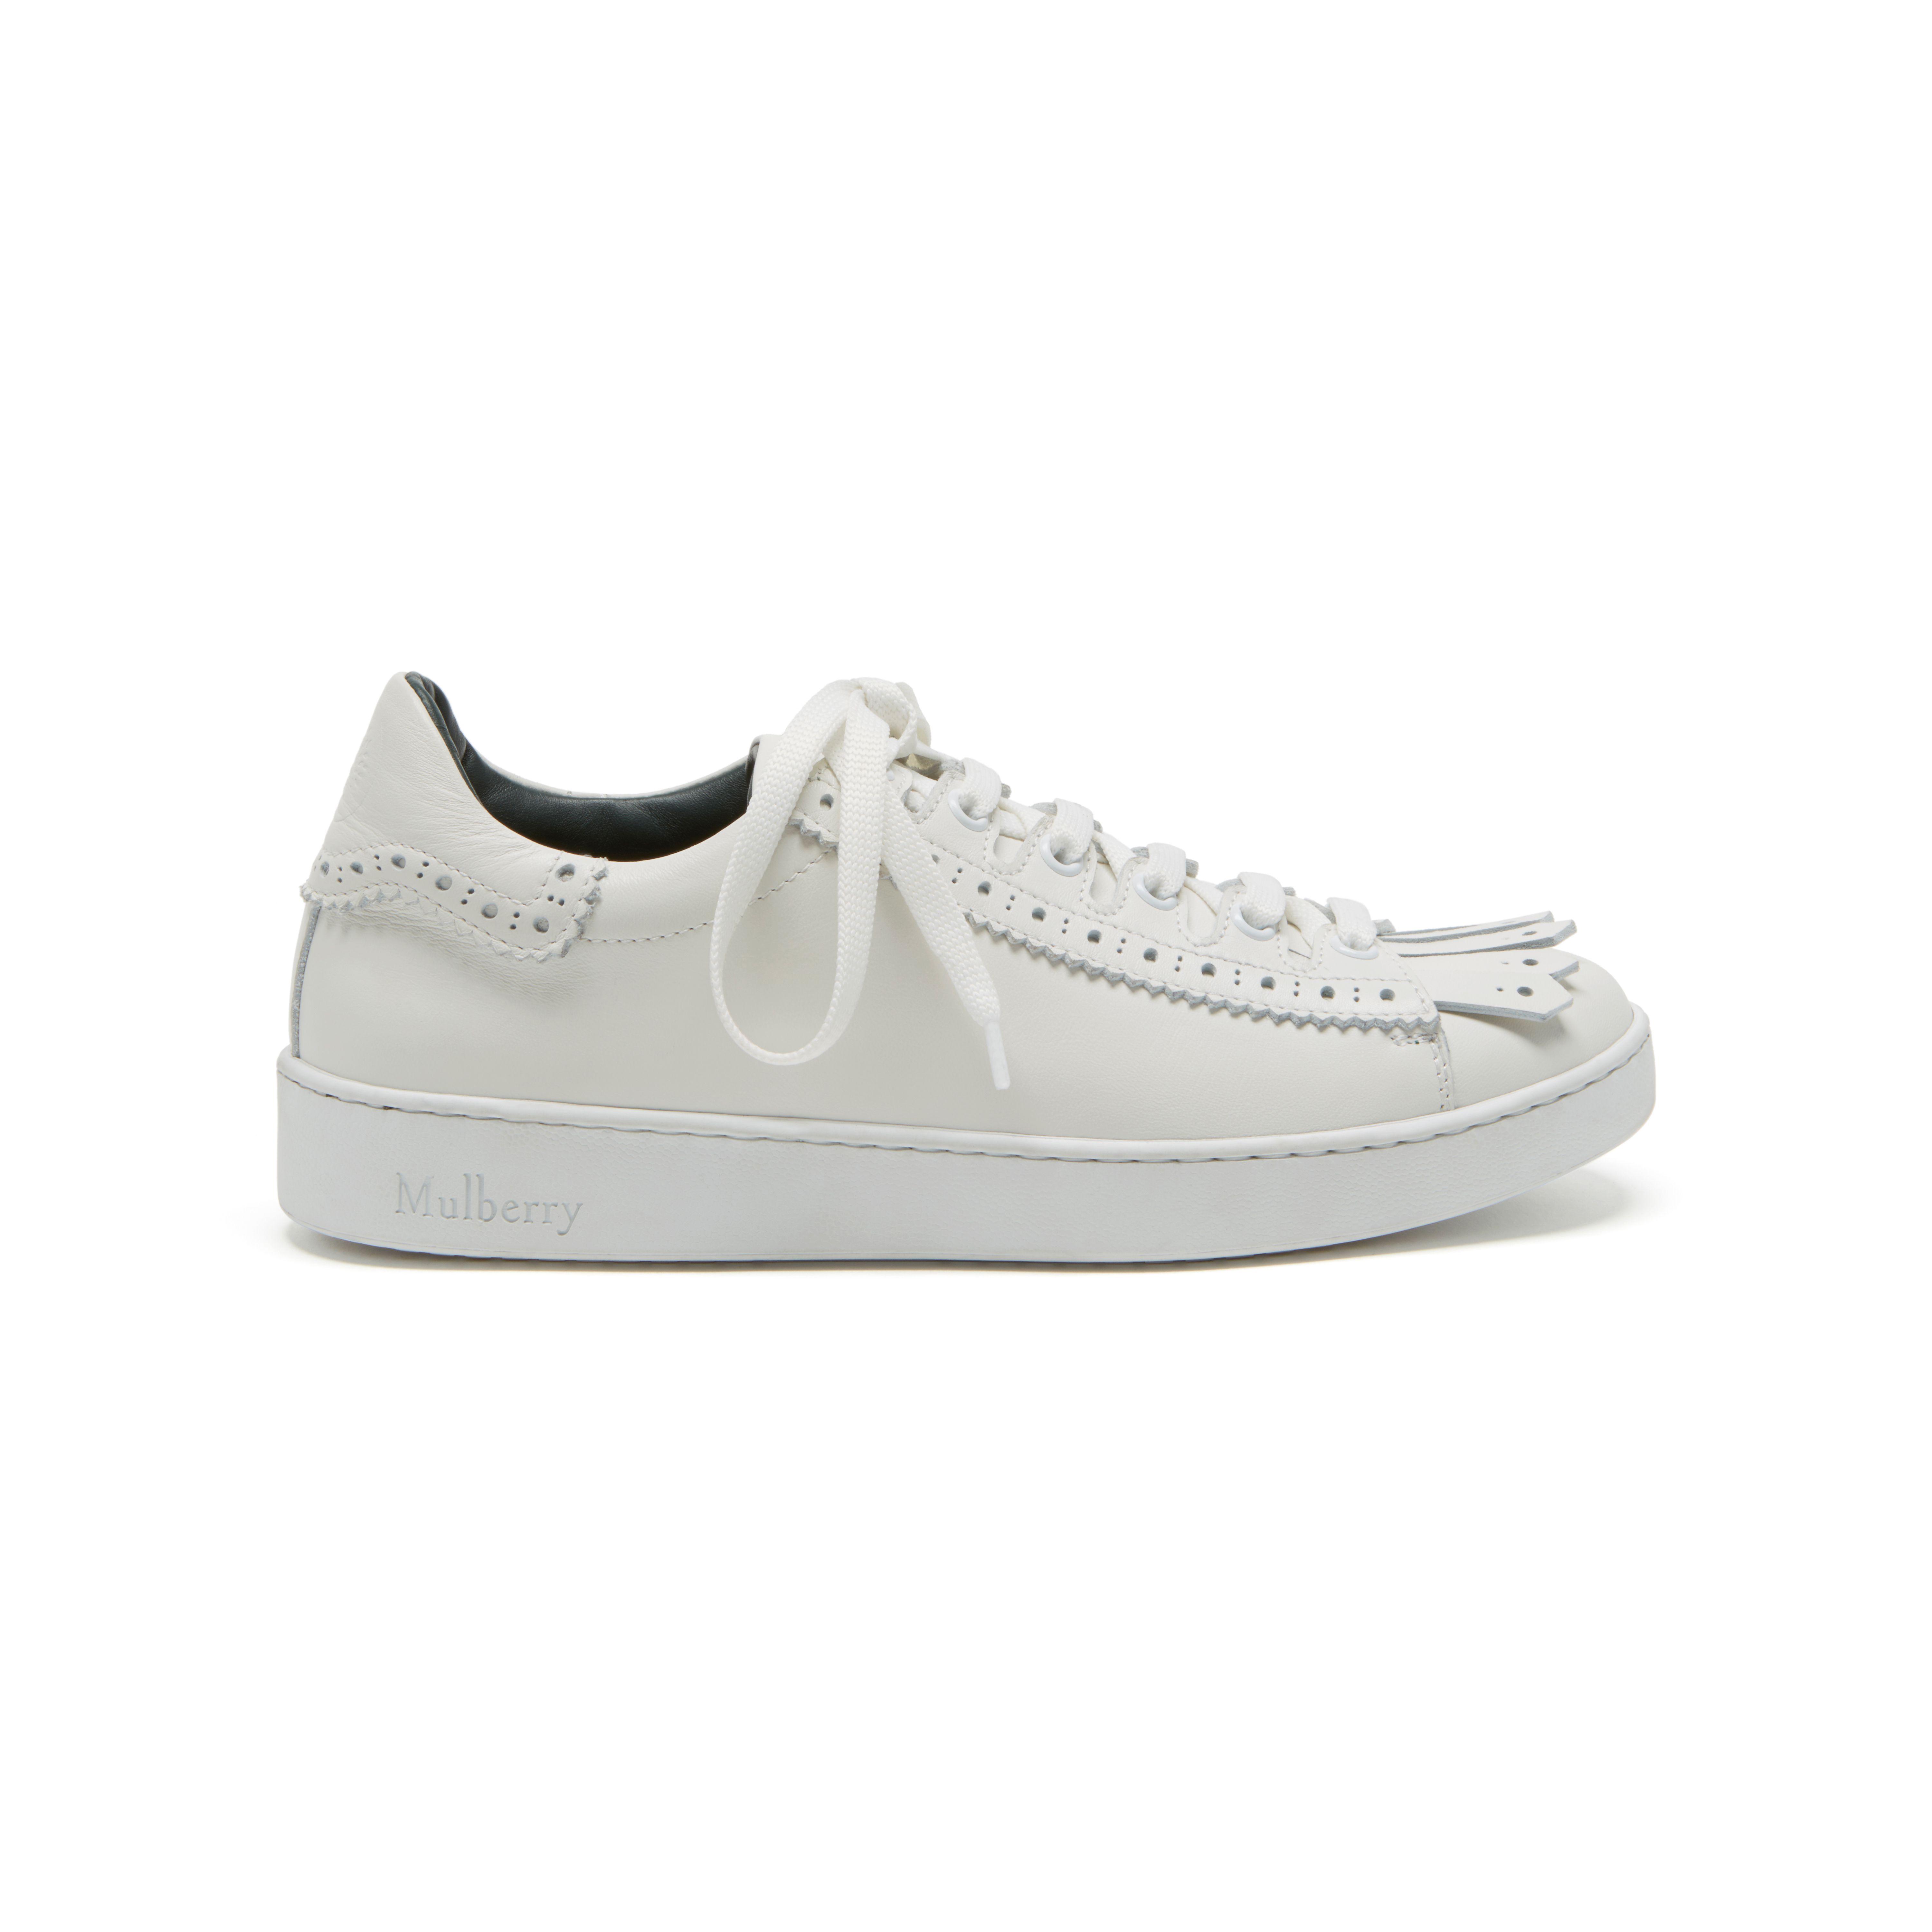 Mulberry Cotton Jump Fringe Sneaker In White Smooth Calf - Lyst